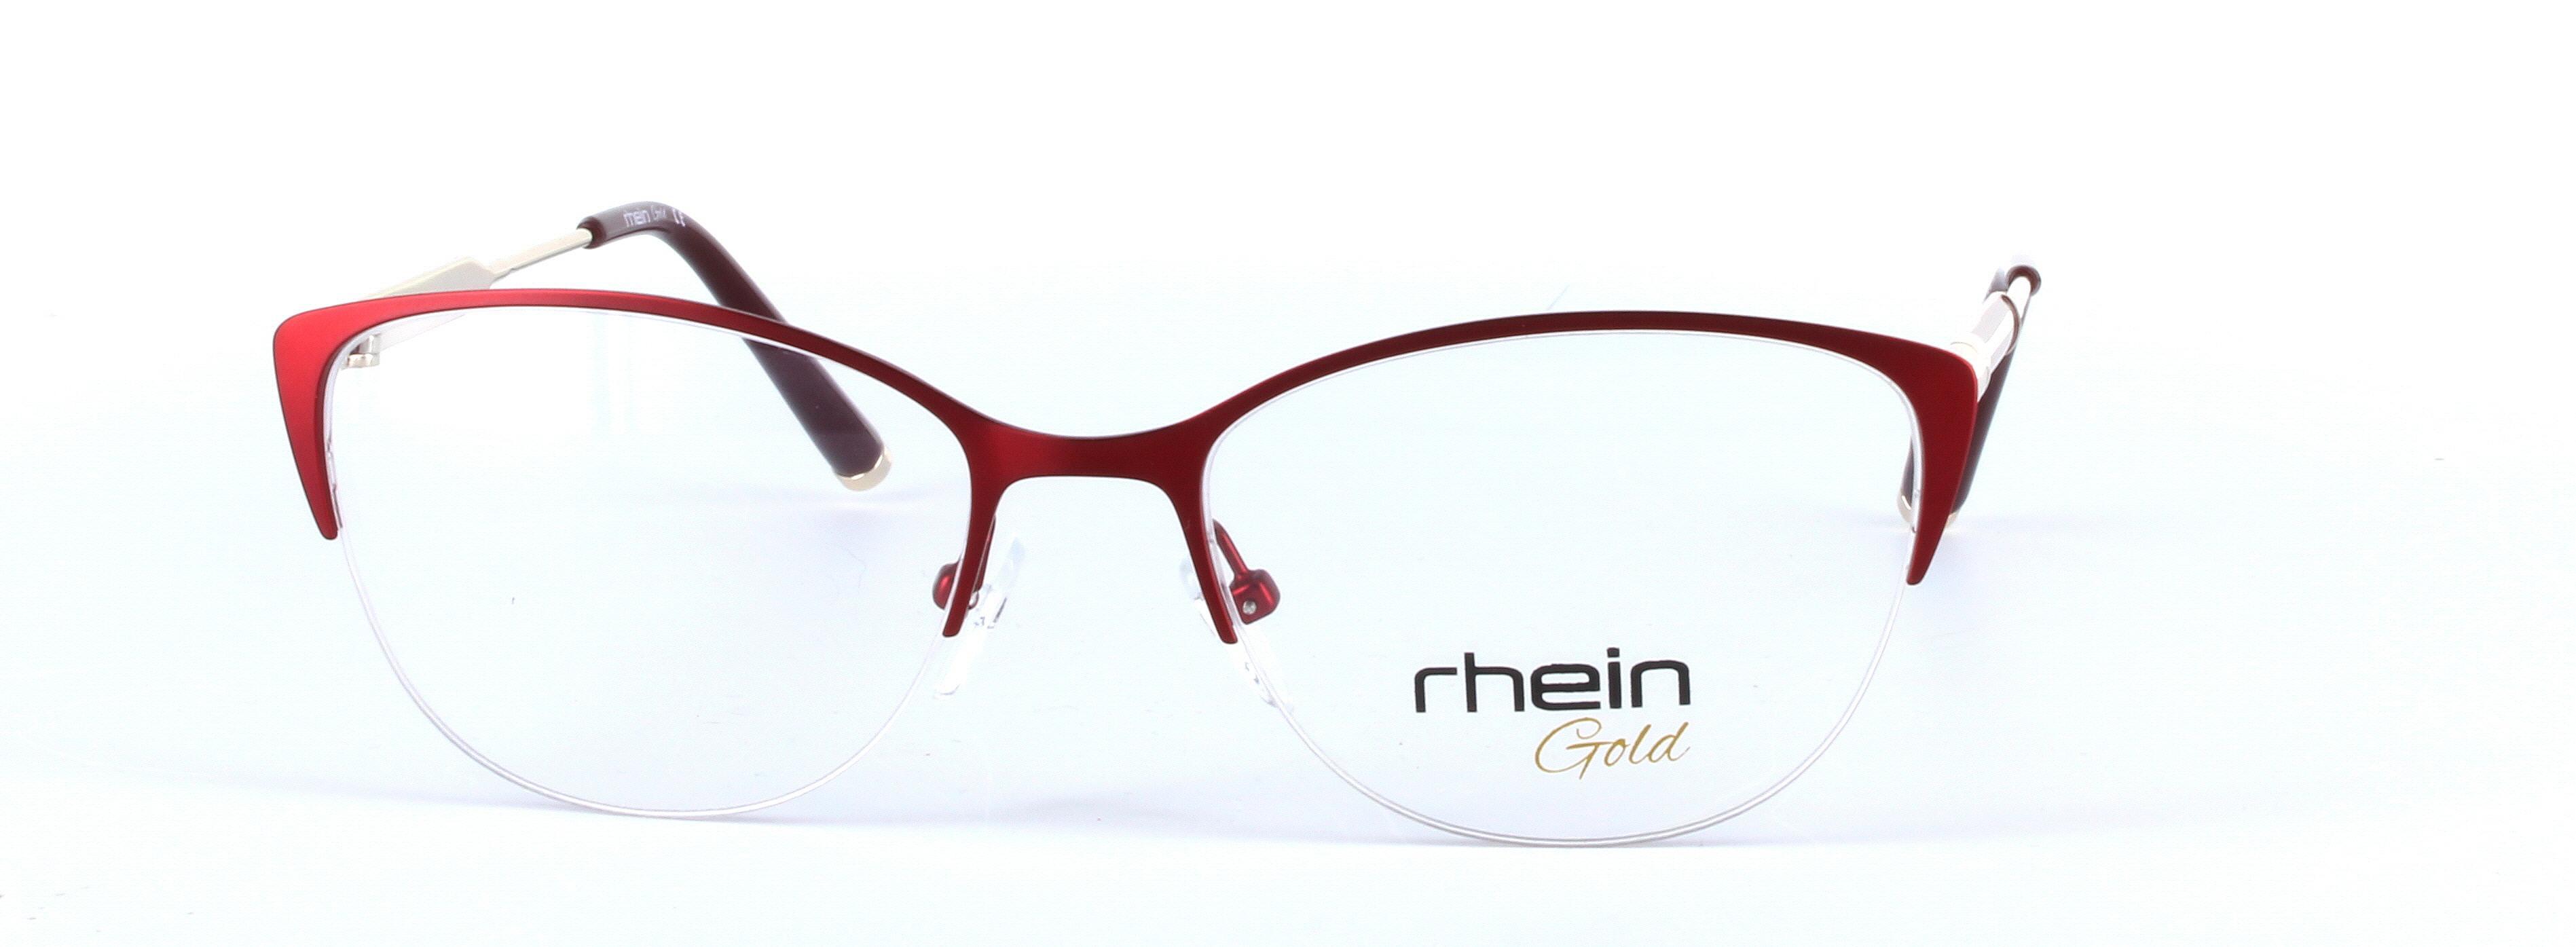 Emily Red Semi Rimless Oval Metal Glasses - Image View 5